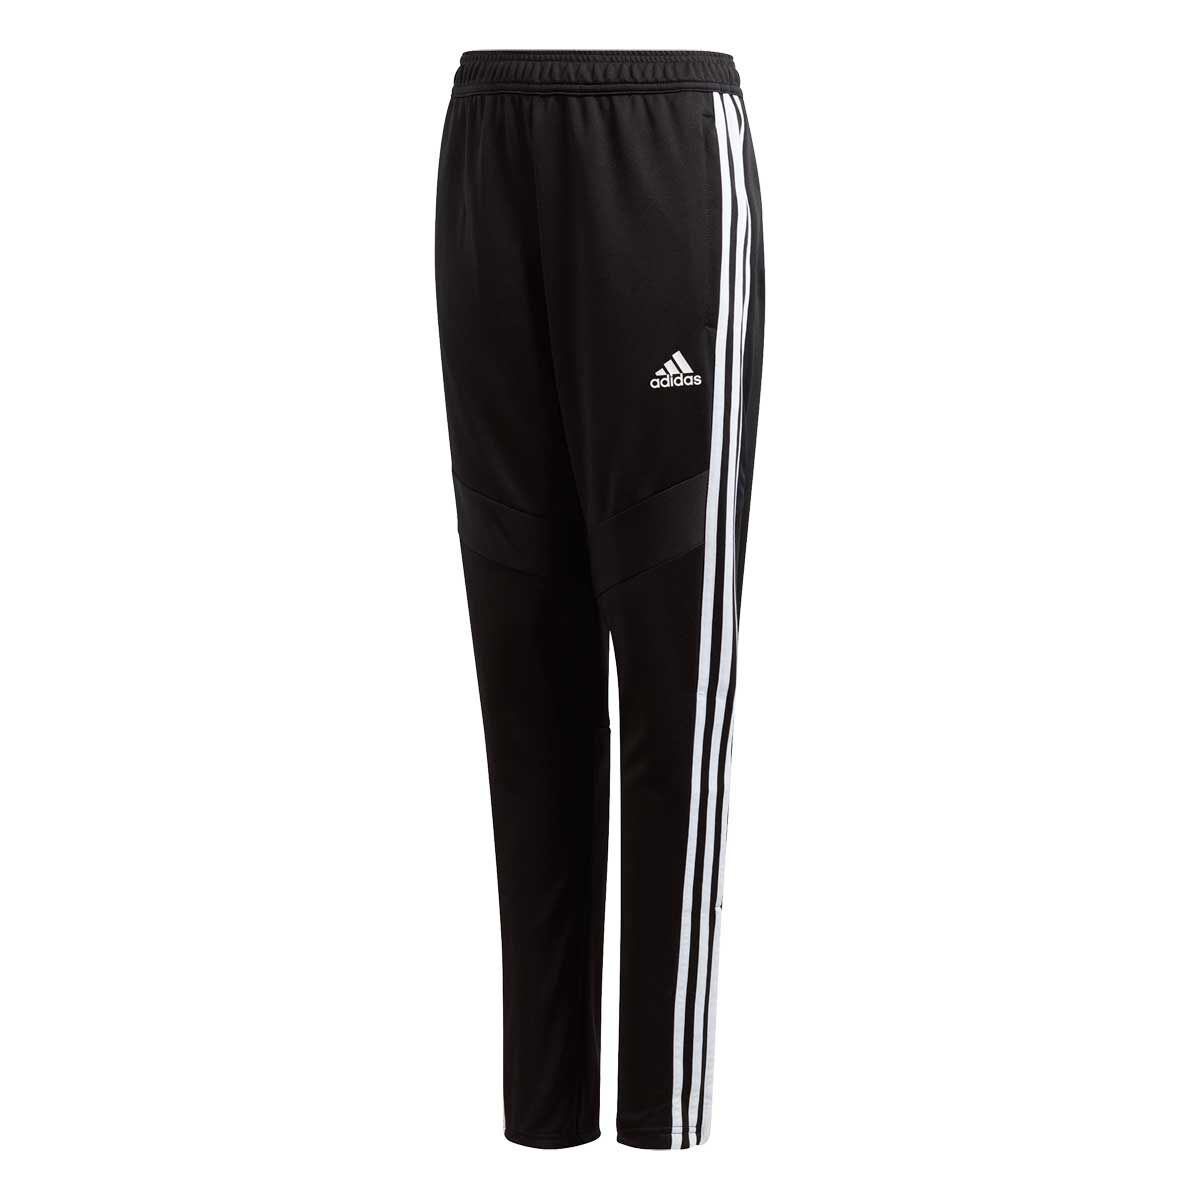 where can i find adidas pants